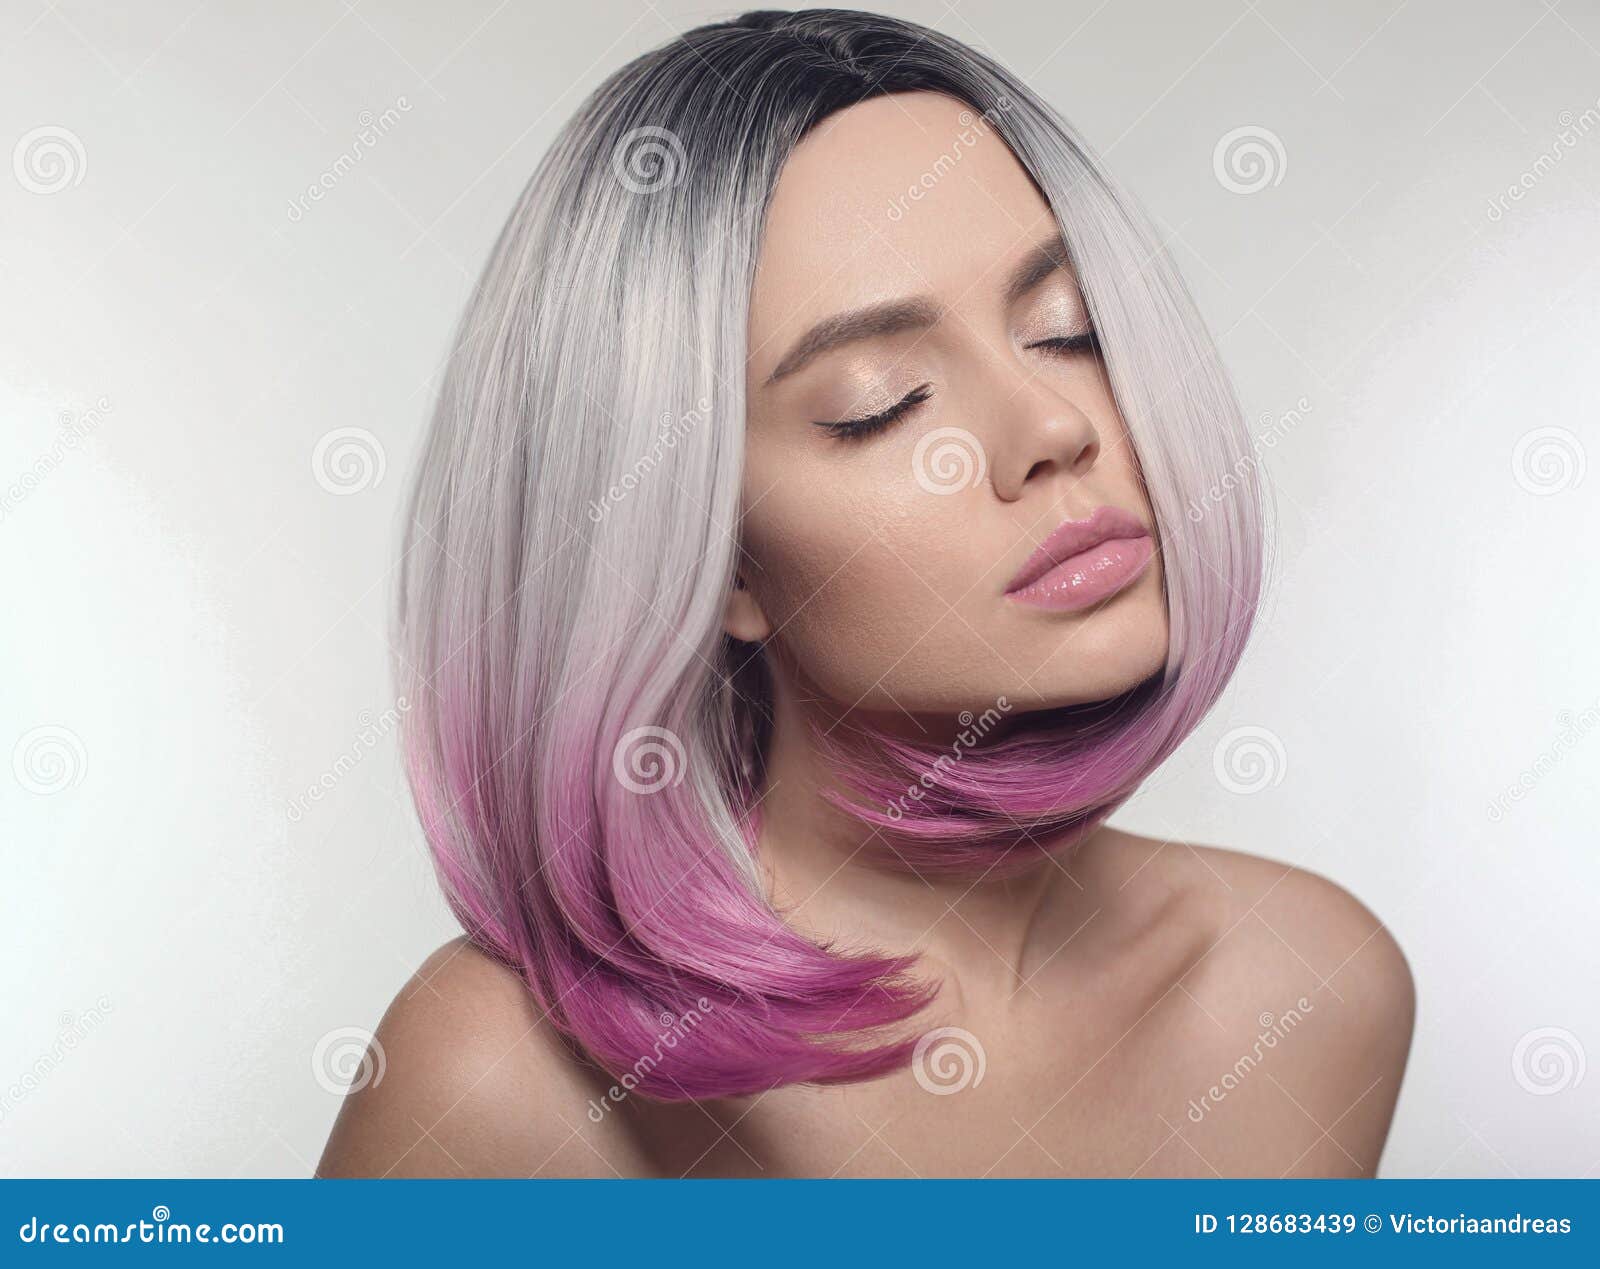 ombre bob short hairstyle. beautiful hair coloring woman. trendy